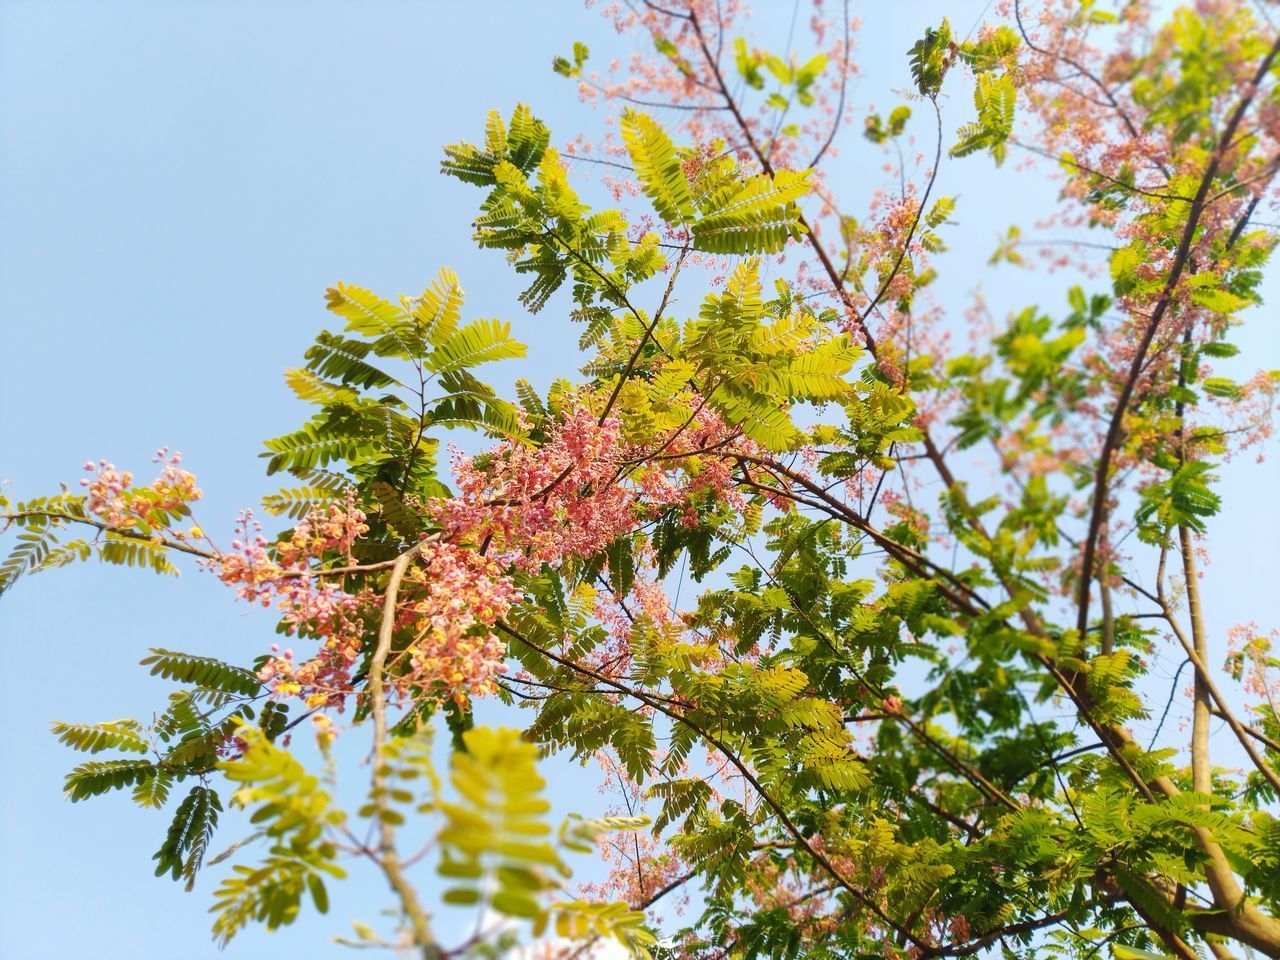 LOW ANGLE VIEW OF FLOWERING PLANT AGAINST SKY